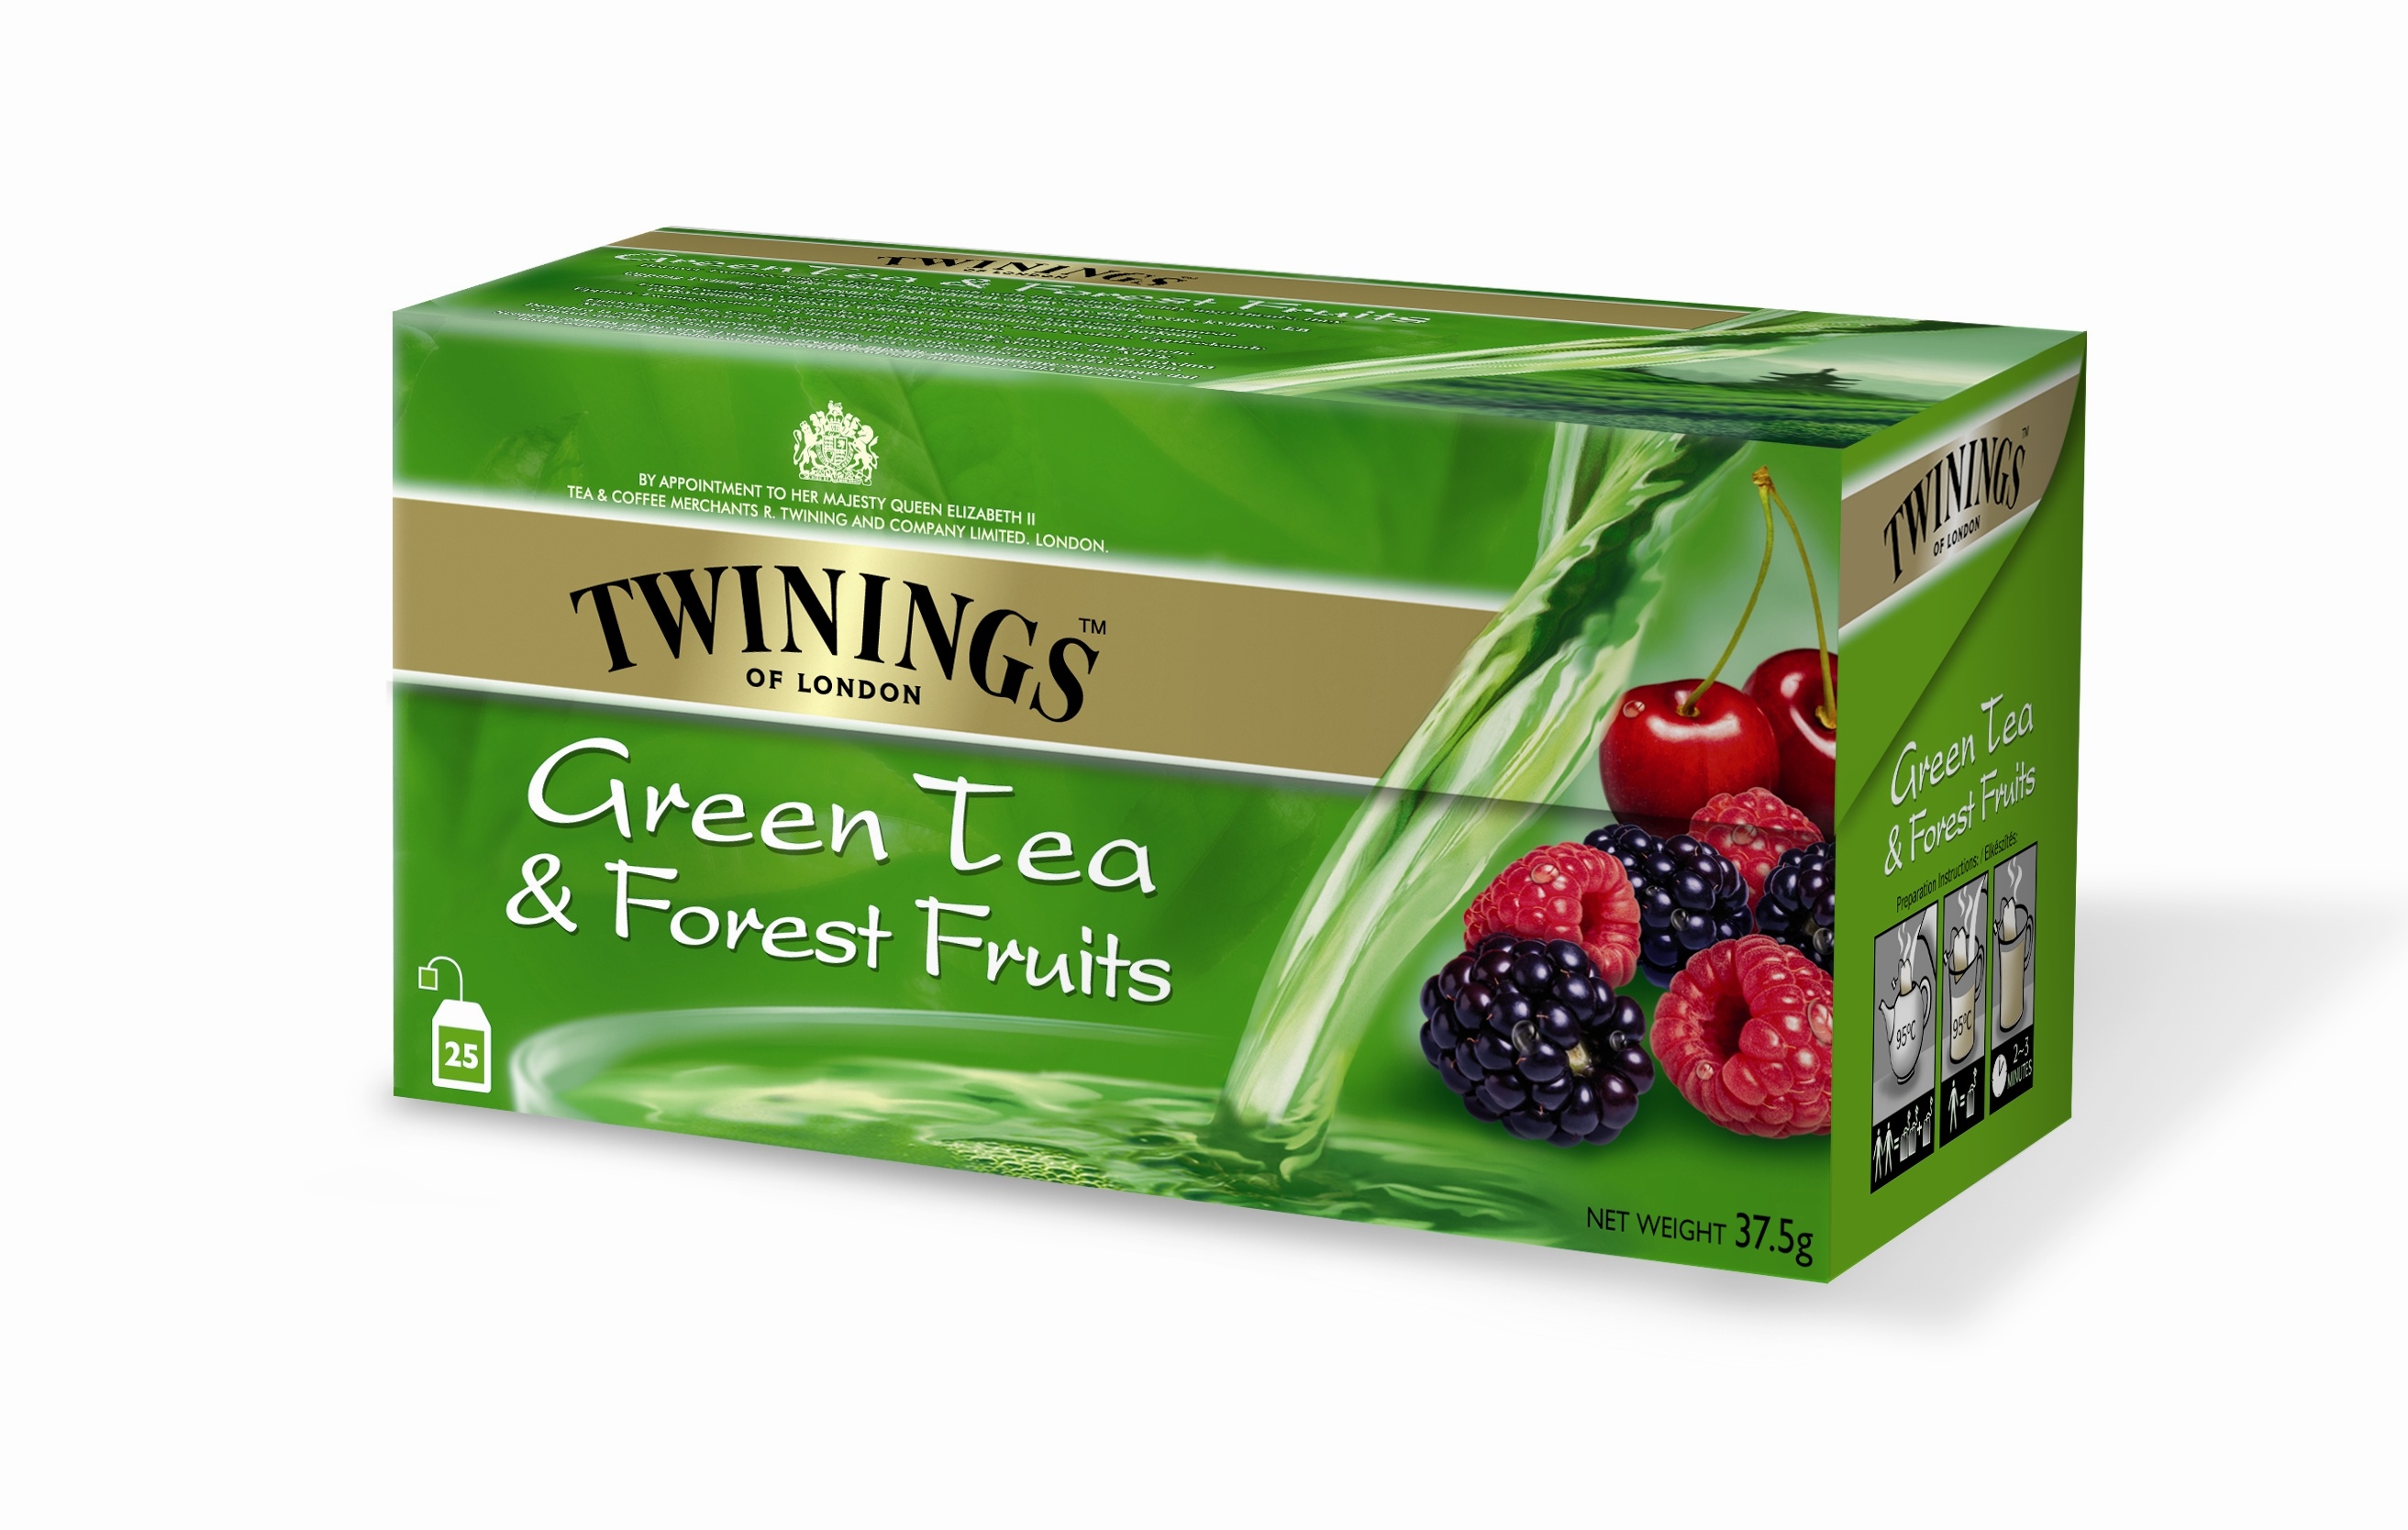 Twinings Green Tea and Forest Fruits